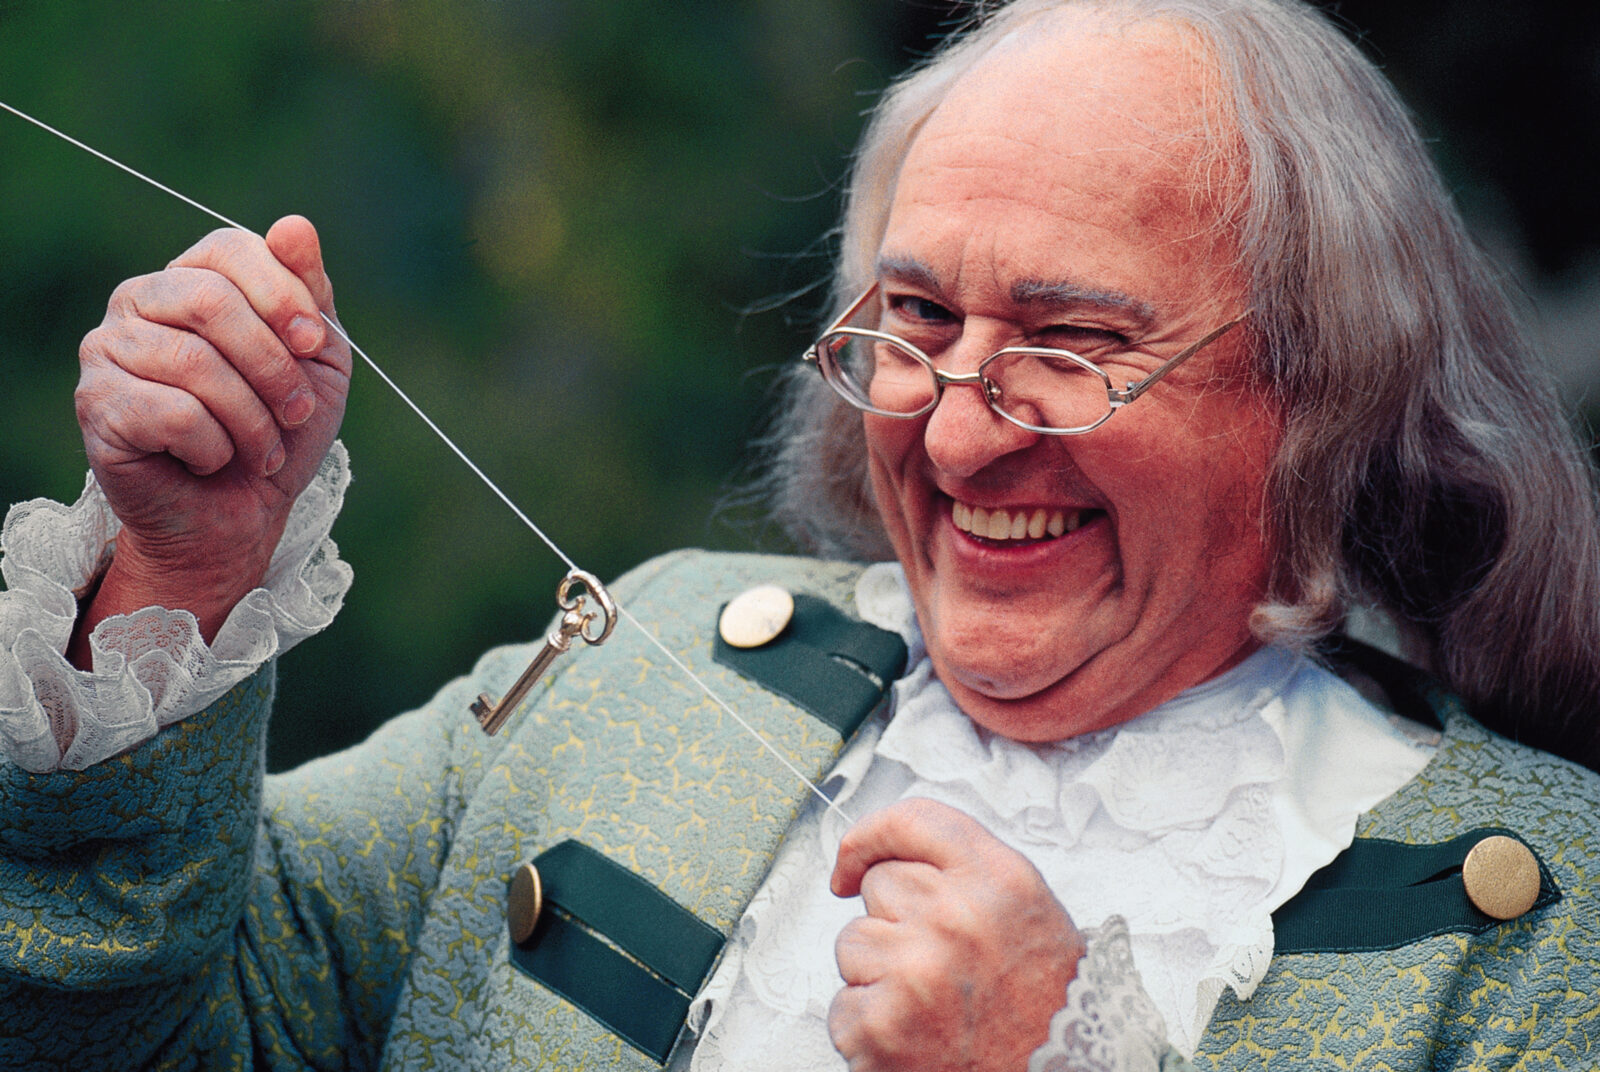 Portrait of man dressed as Benjamin Franklin with key and kite winking at camera